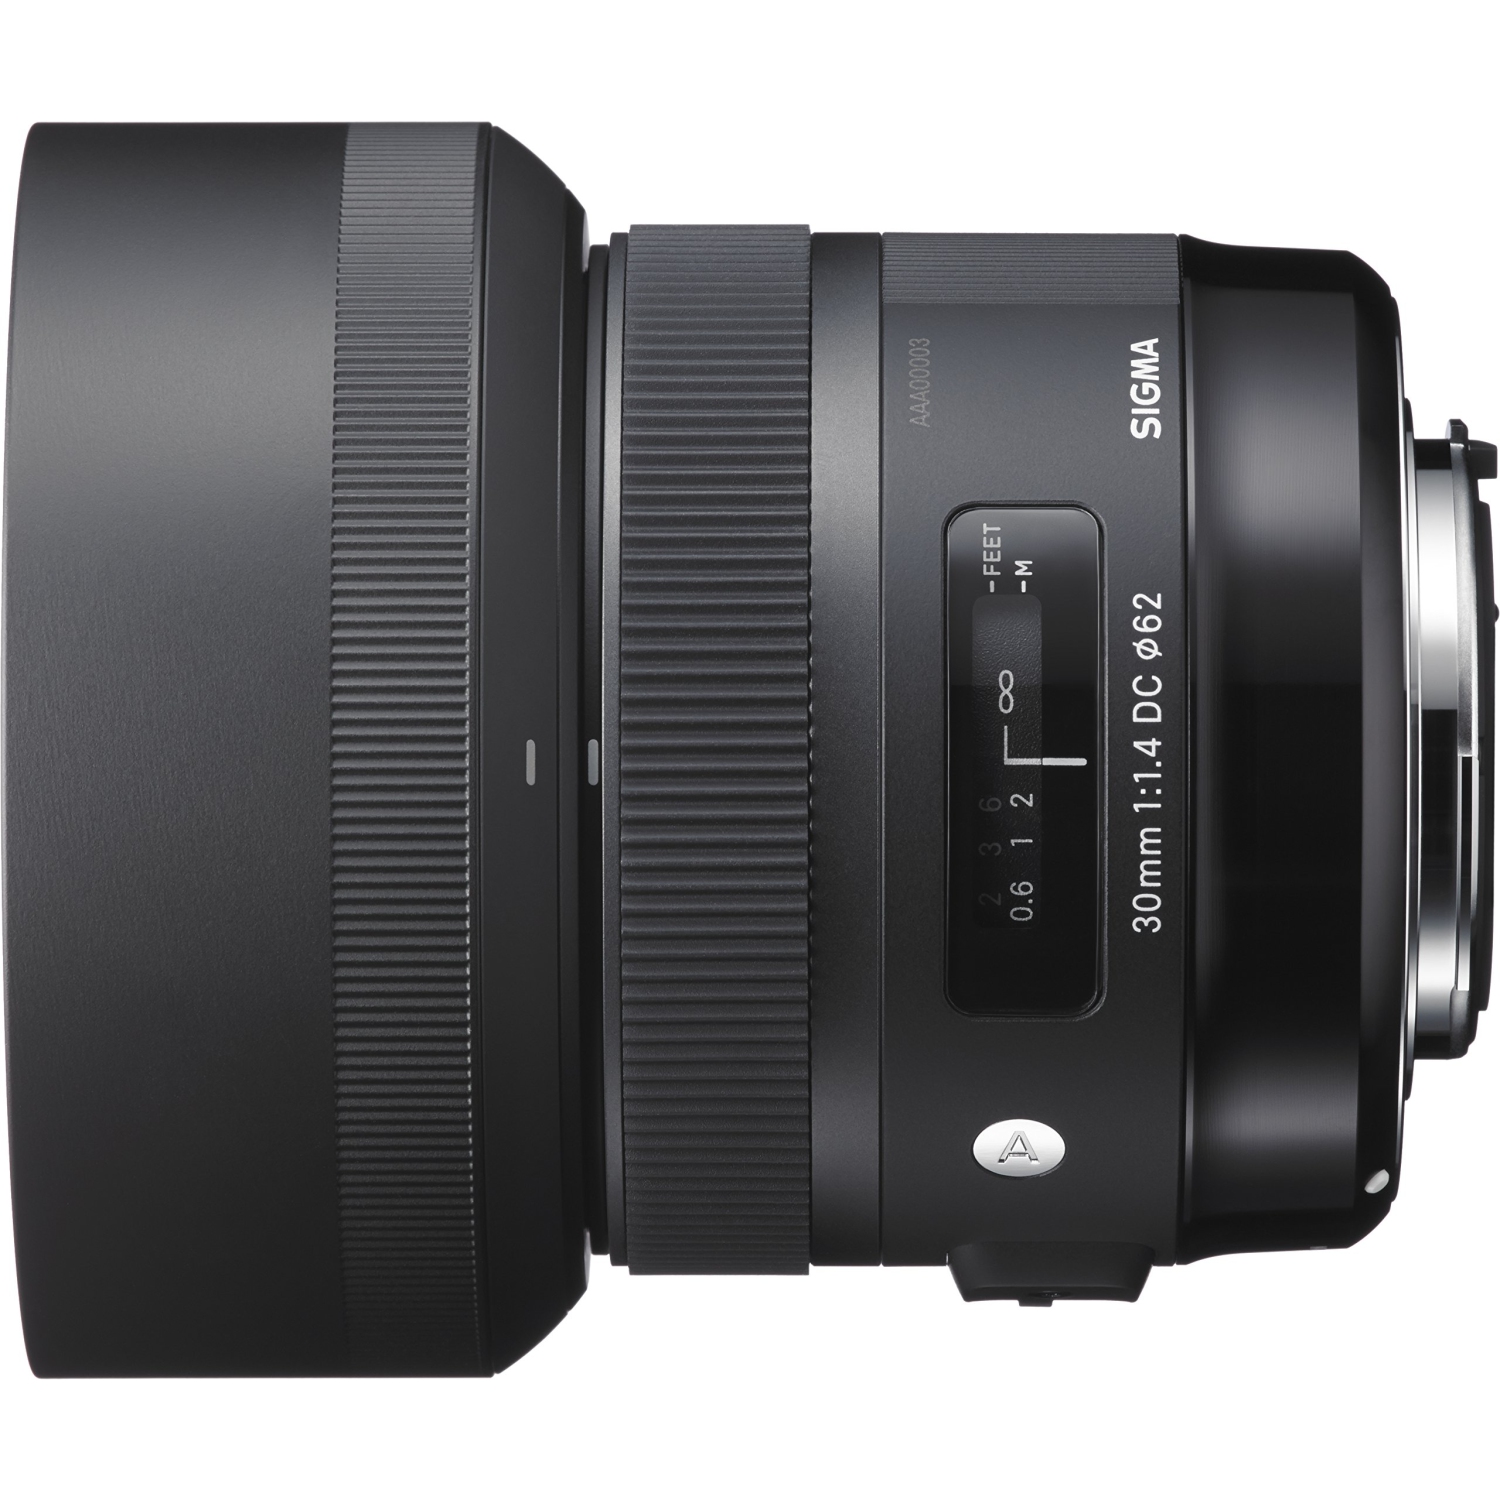 Sigma 30mm f1.4 DC HSM Lens Canon | Best Buy Canada